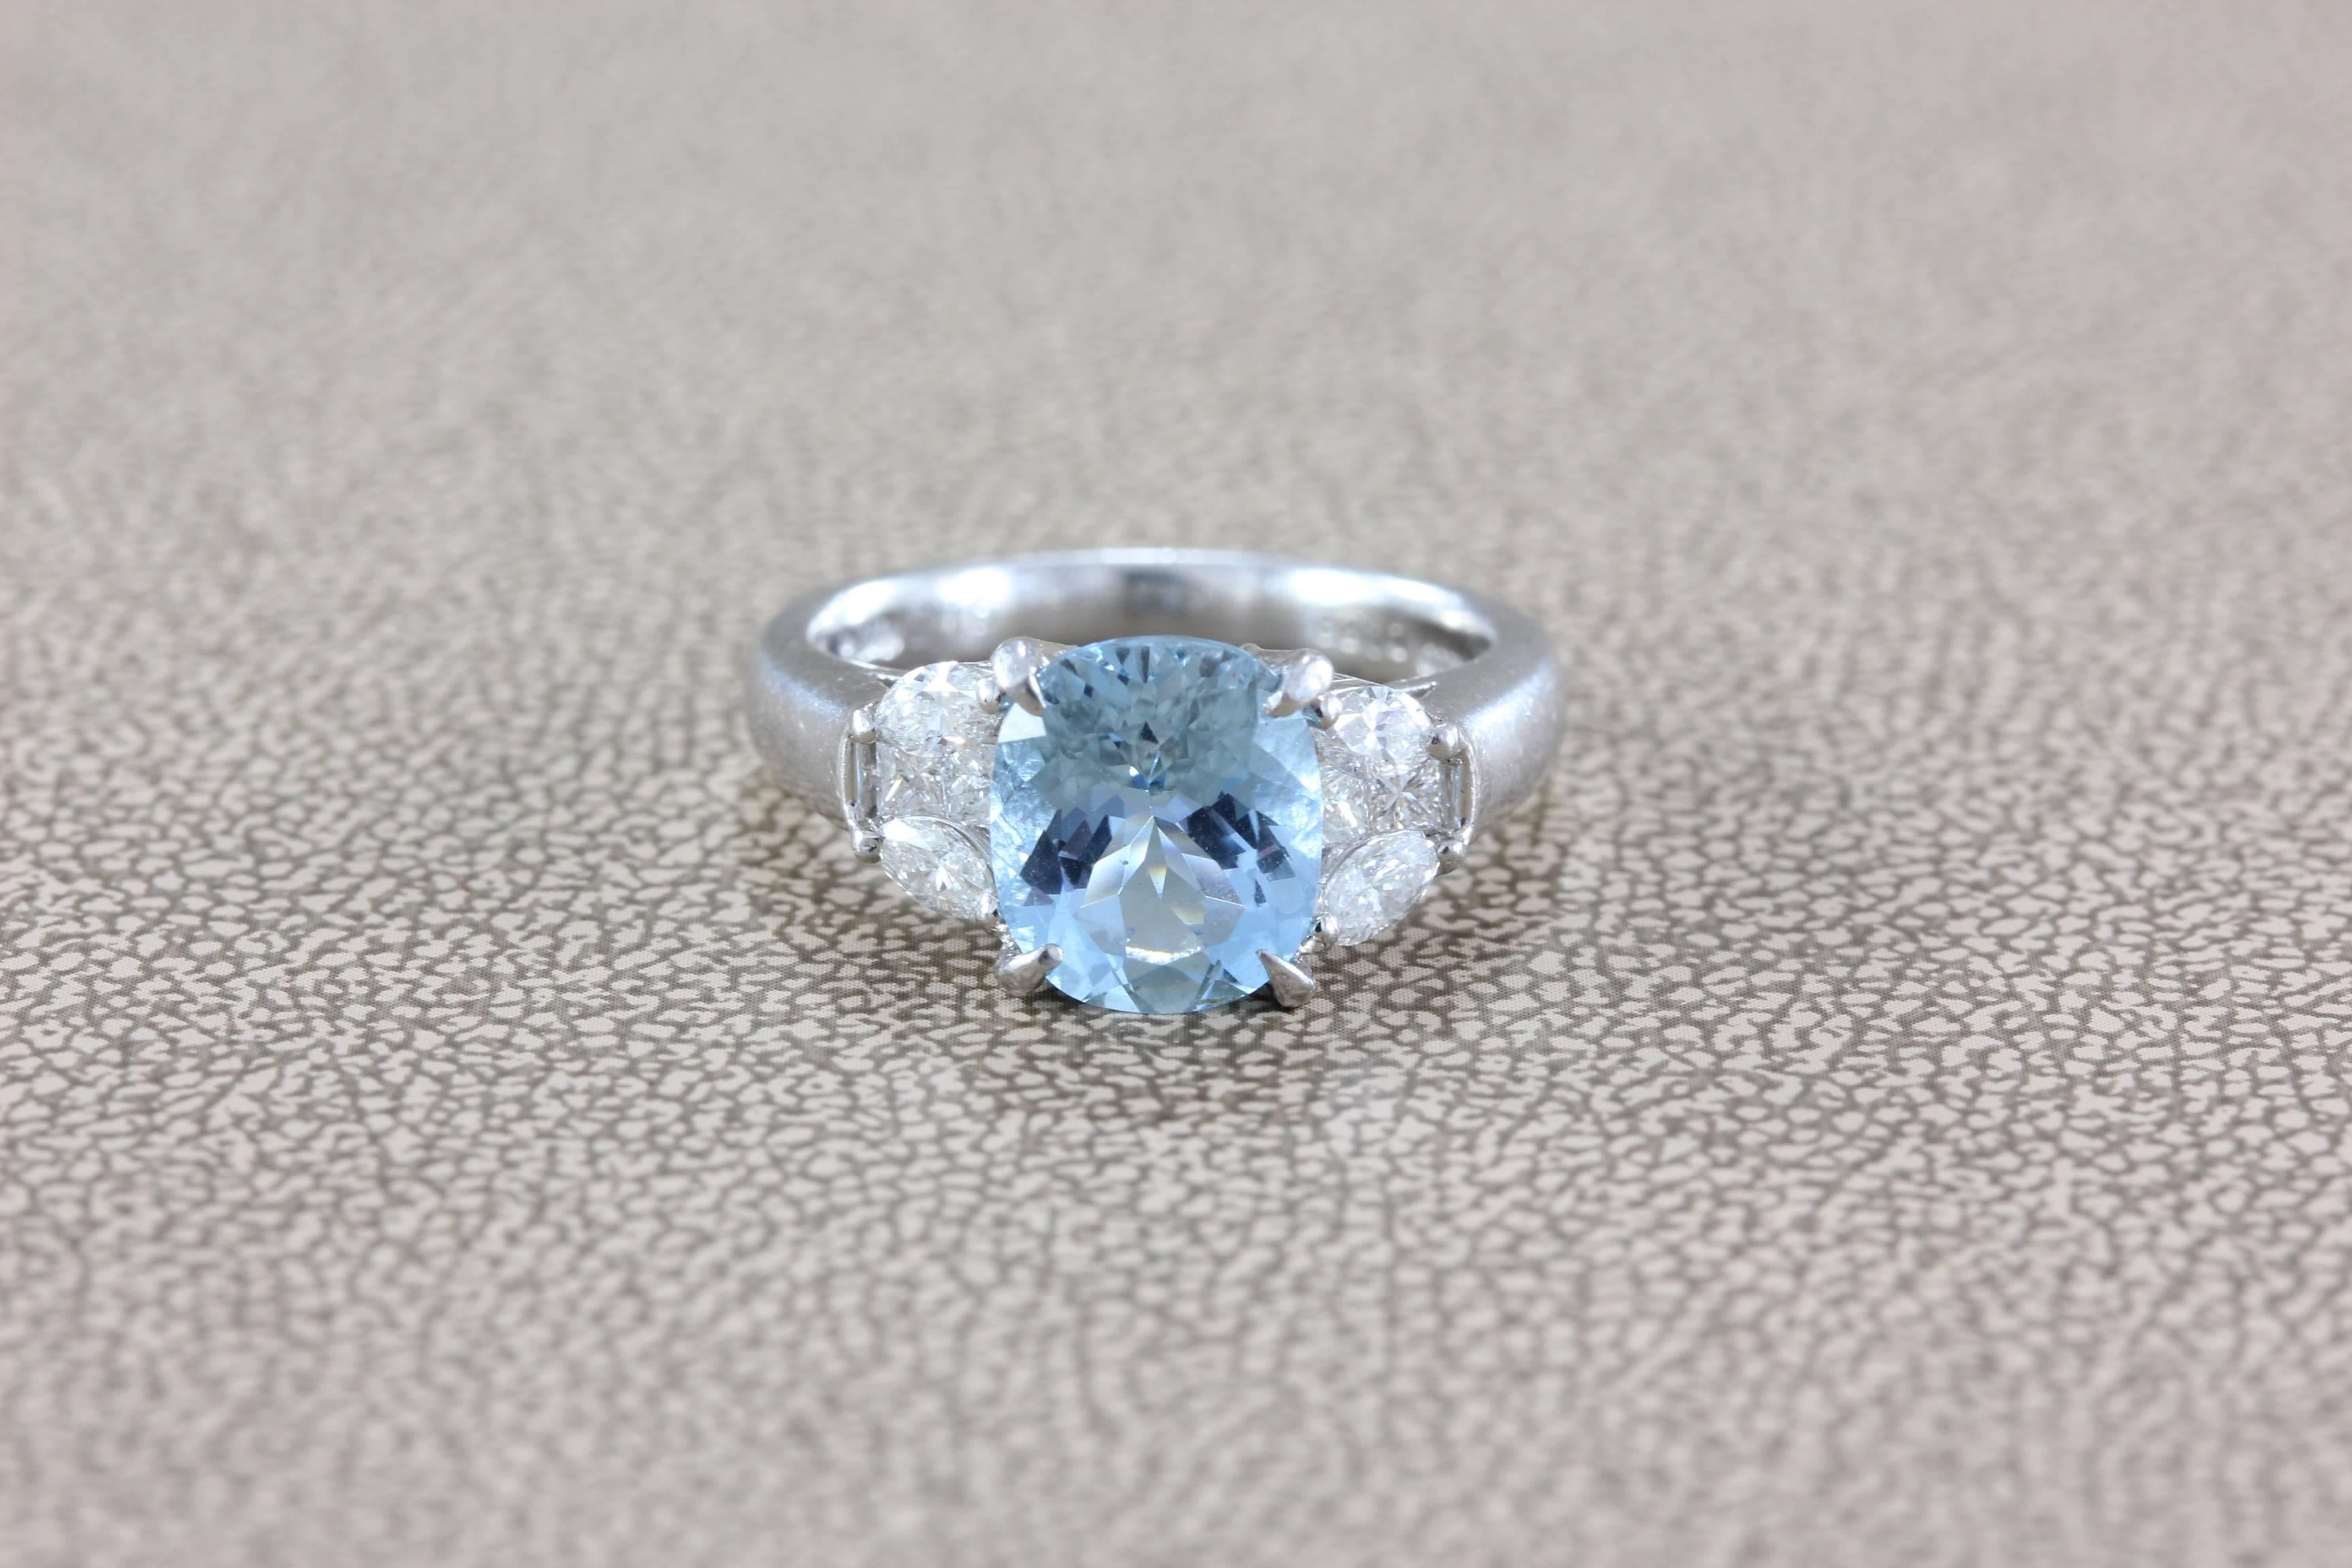 A quality made platinum ring featuring a 2.16 carat gem aquamarine. Accenting the center stone are 0.53 carats of diamond, all set in platinum. A simple everyday ring that will last generations. 

Size 6.25 (sizable) 
